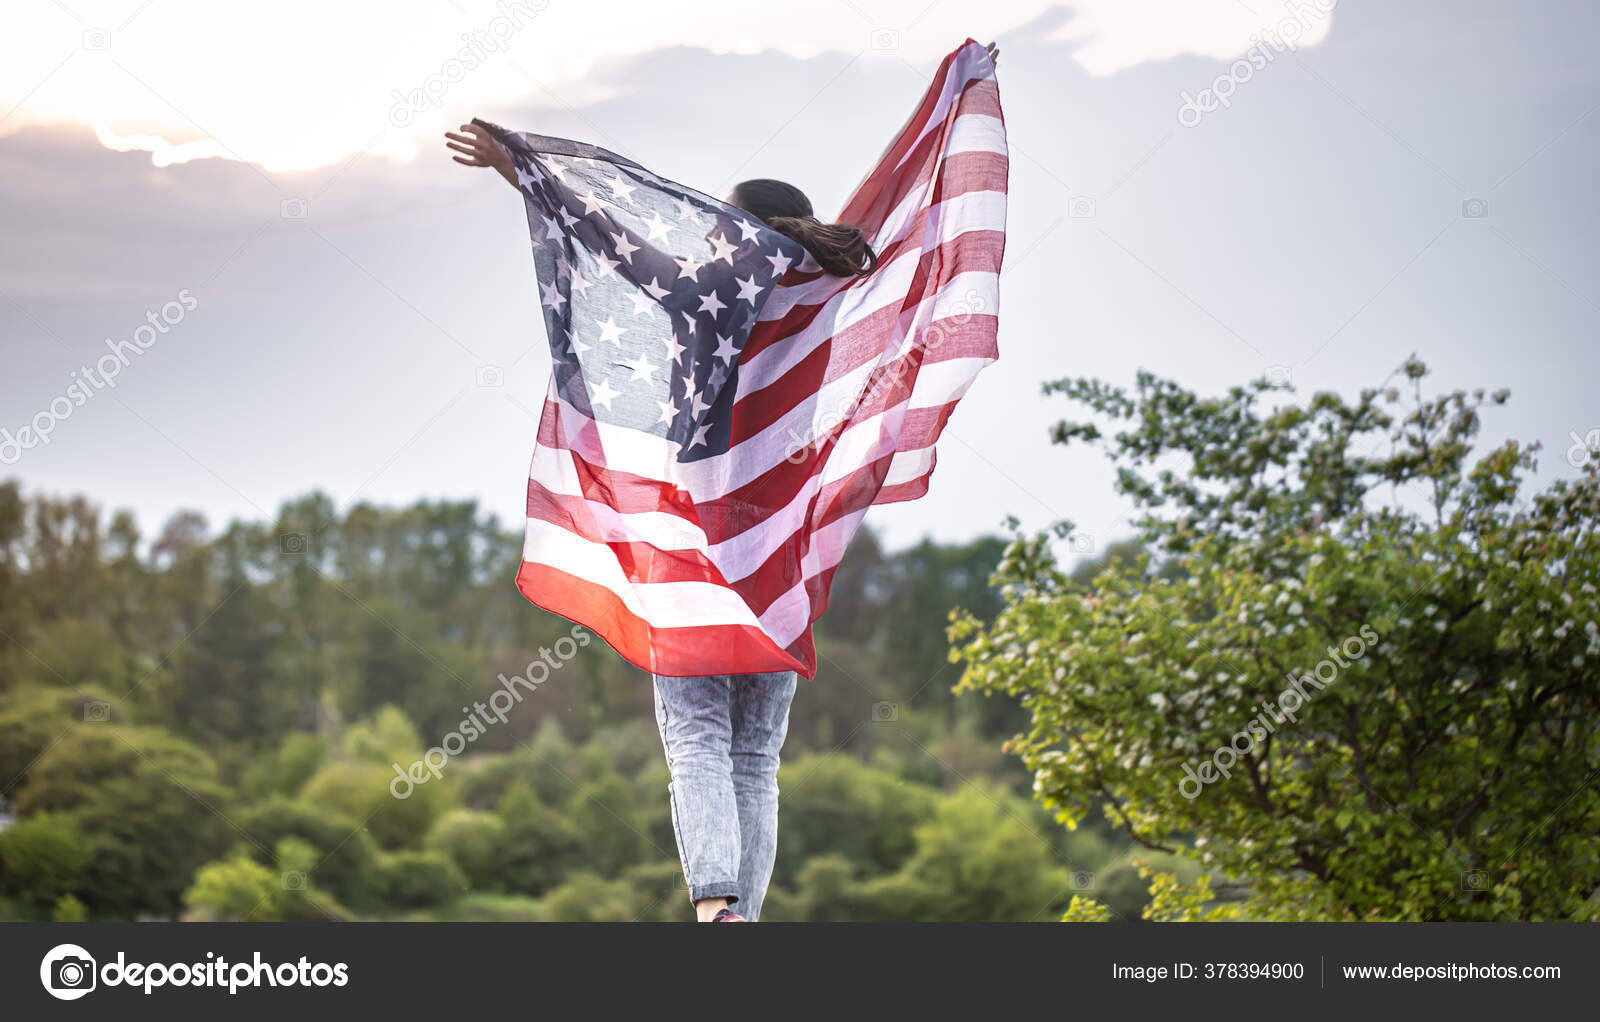 Day Woman Nature Flag Patriotism Love Stock Photo by ©puhimec 378394900